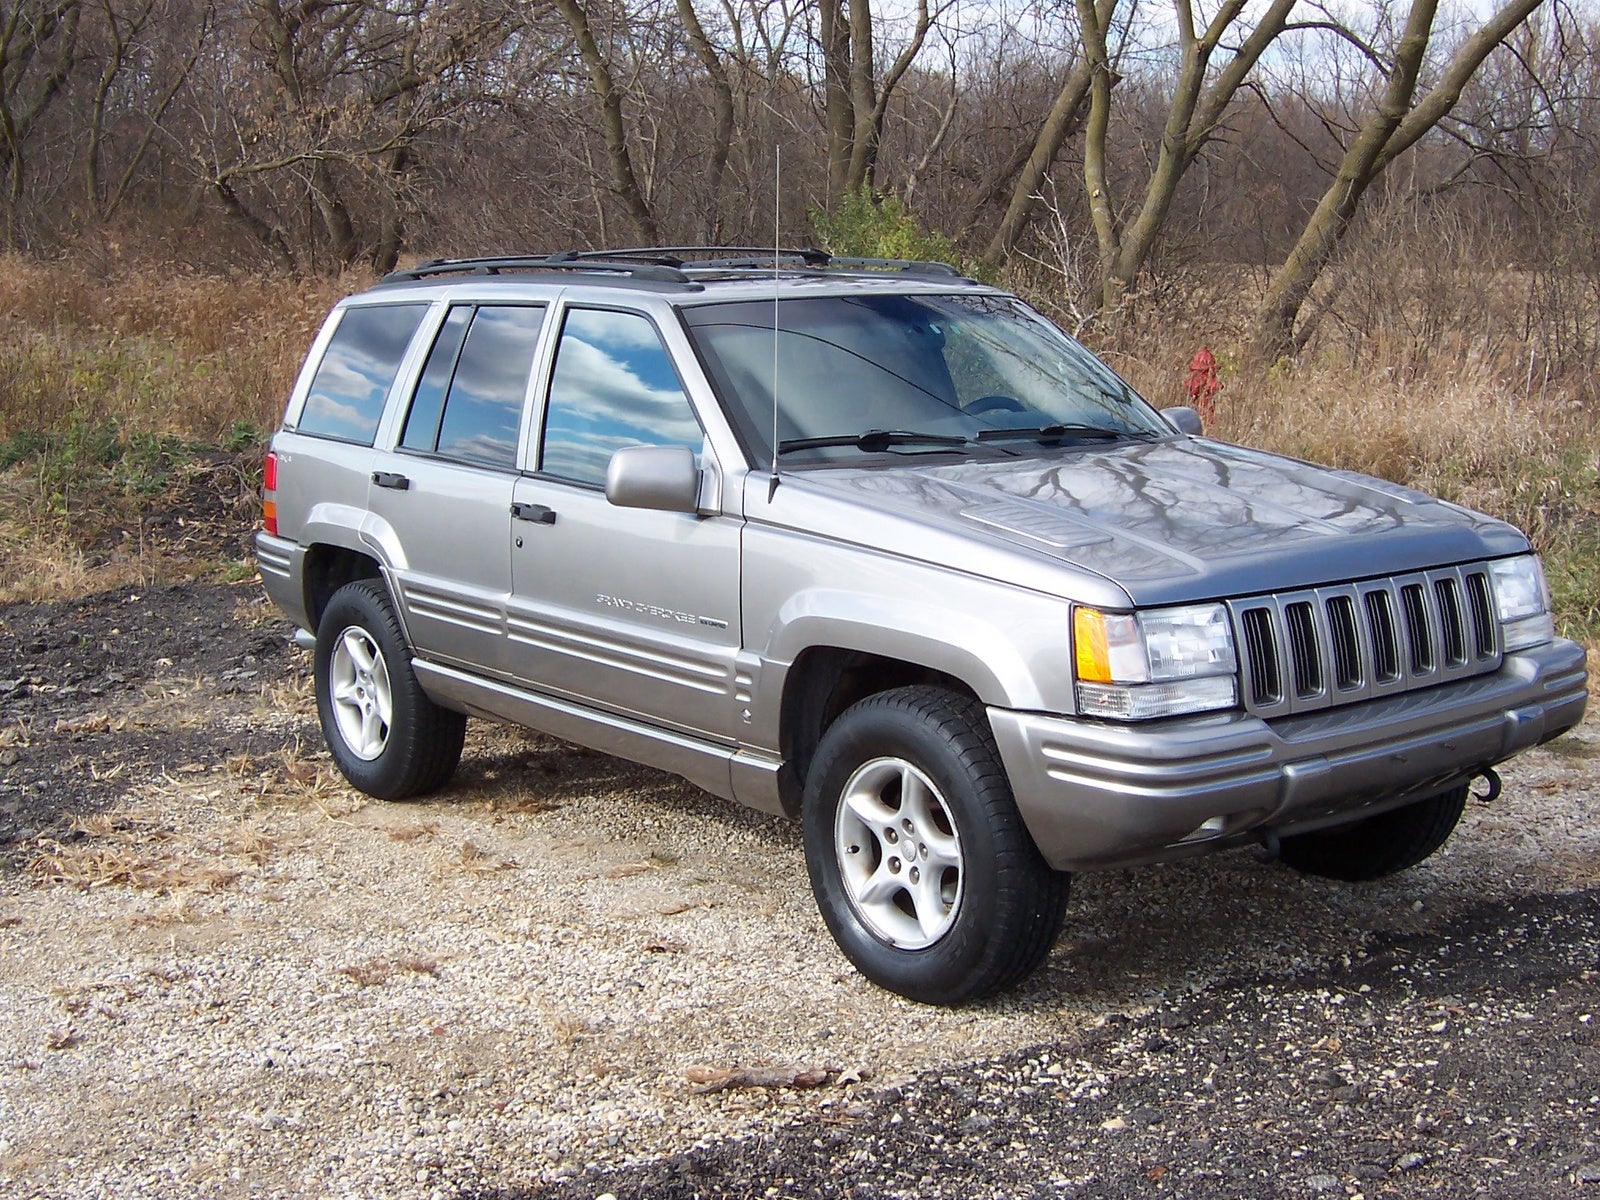 1998 Jeep grand cherokee limited #4